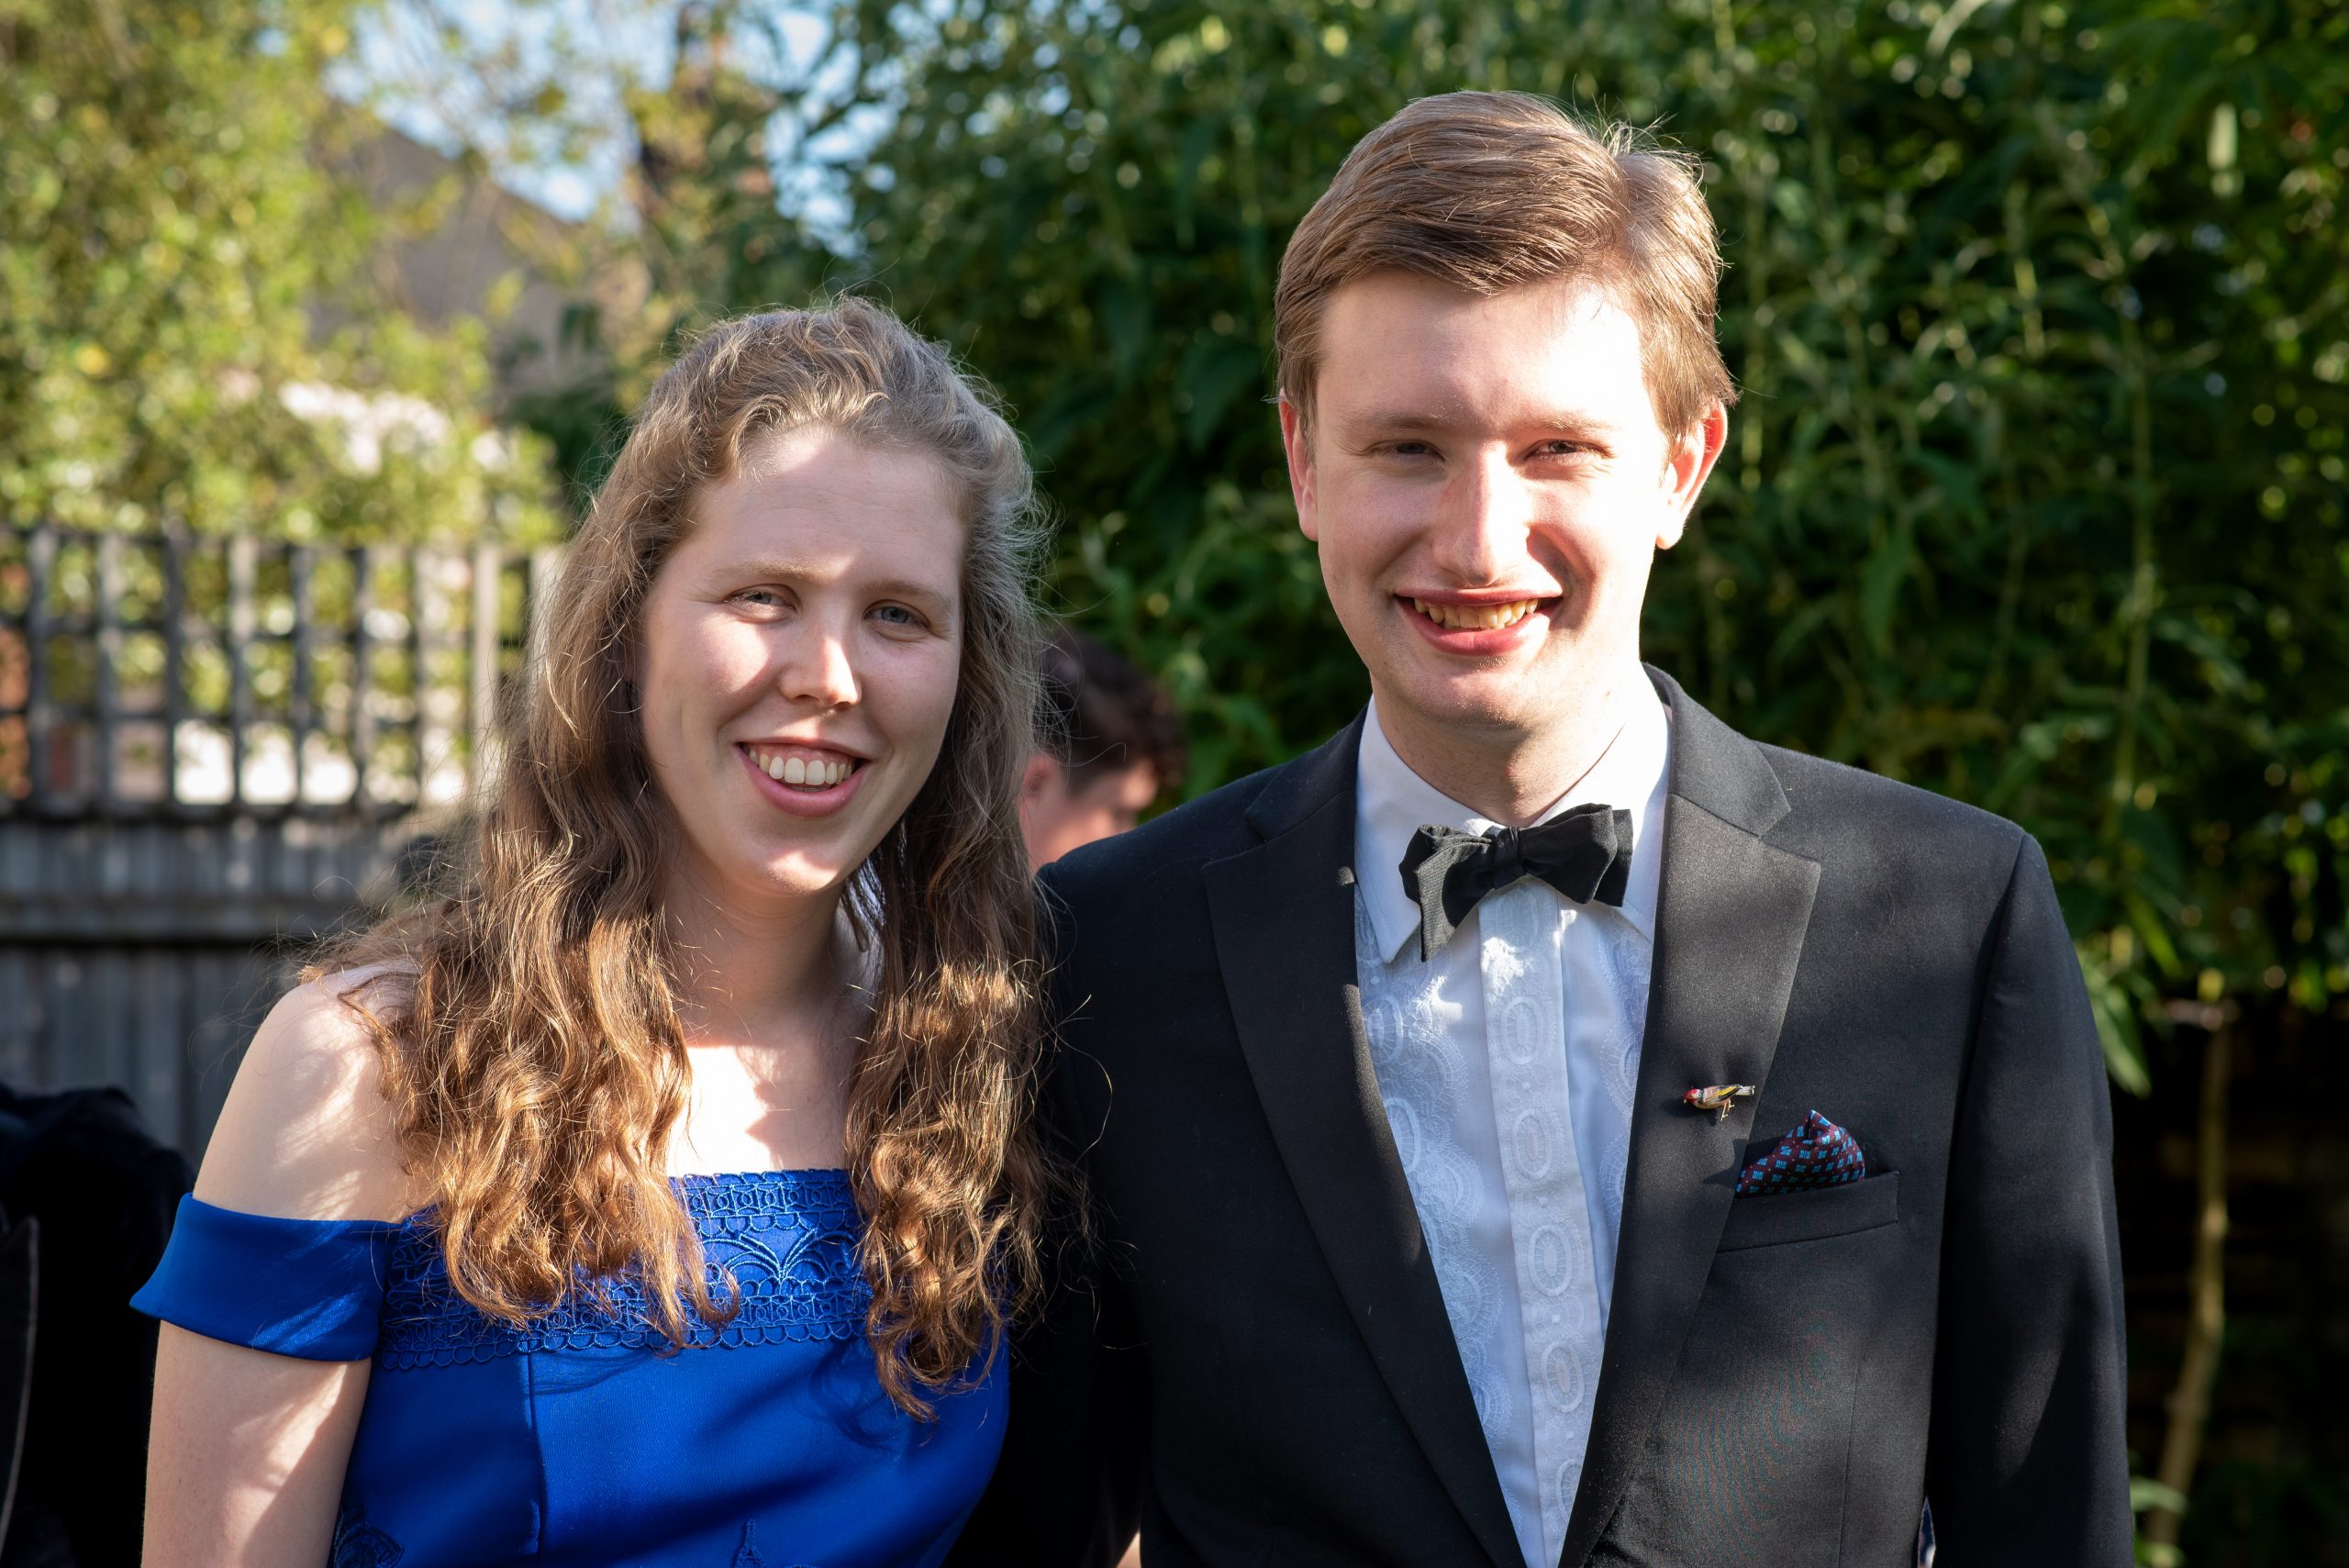 Andrew standing with his girlfriend Gemma dressed up very fancily ahead of a College Summer Party.